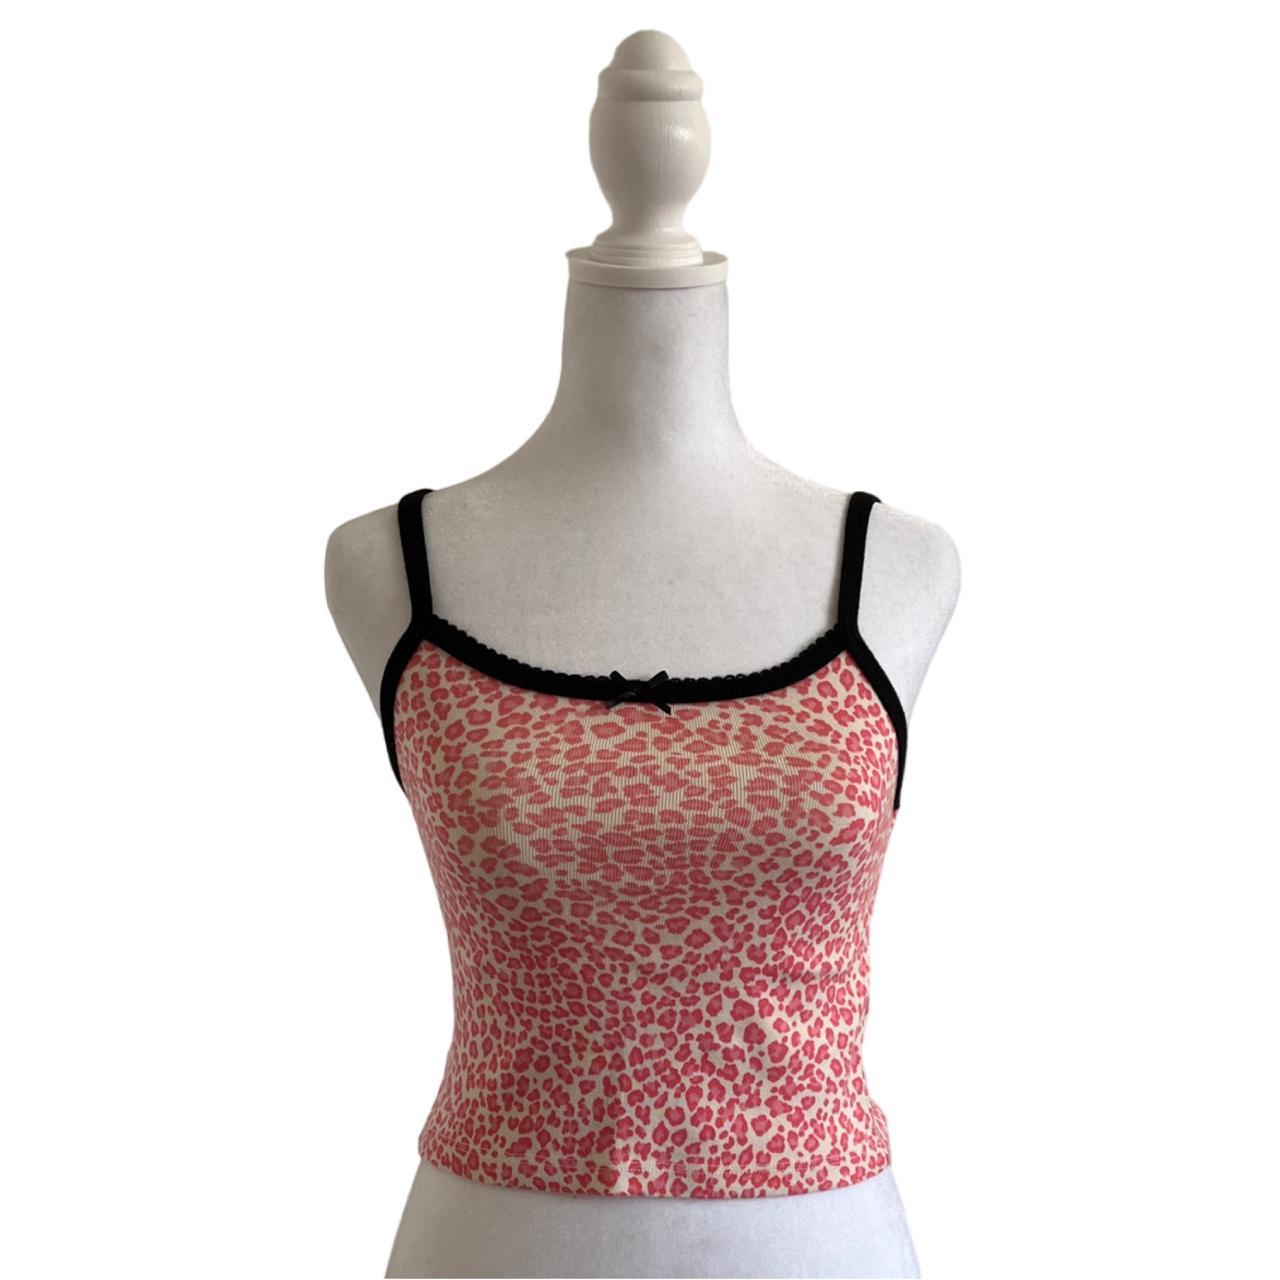 Brandy Melville Pink Cheetah Print Zelly Crop Top Size XS - $29 (17% Off  Retail) - From roya